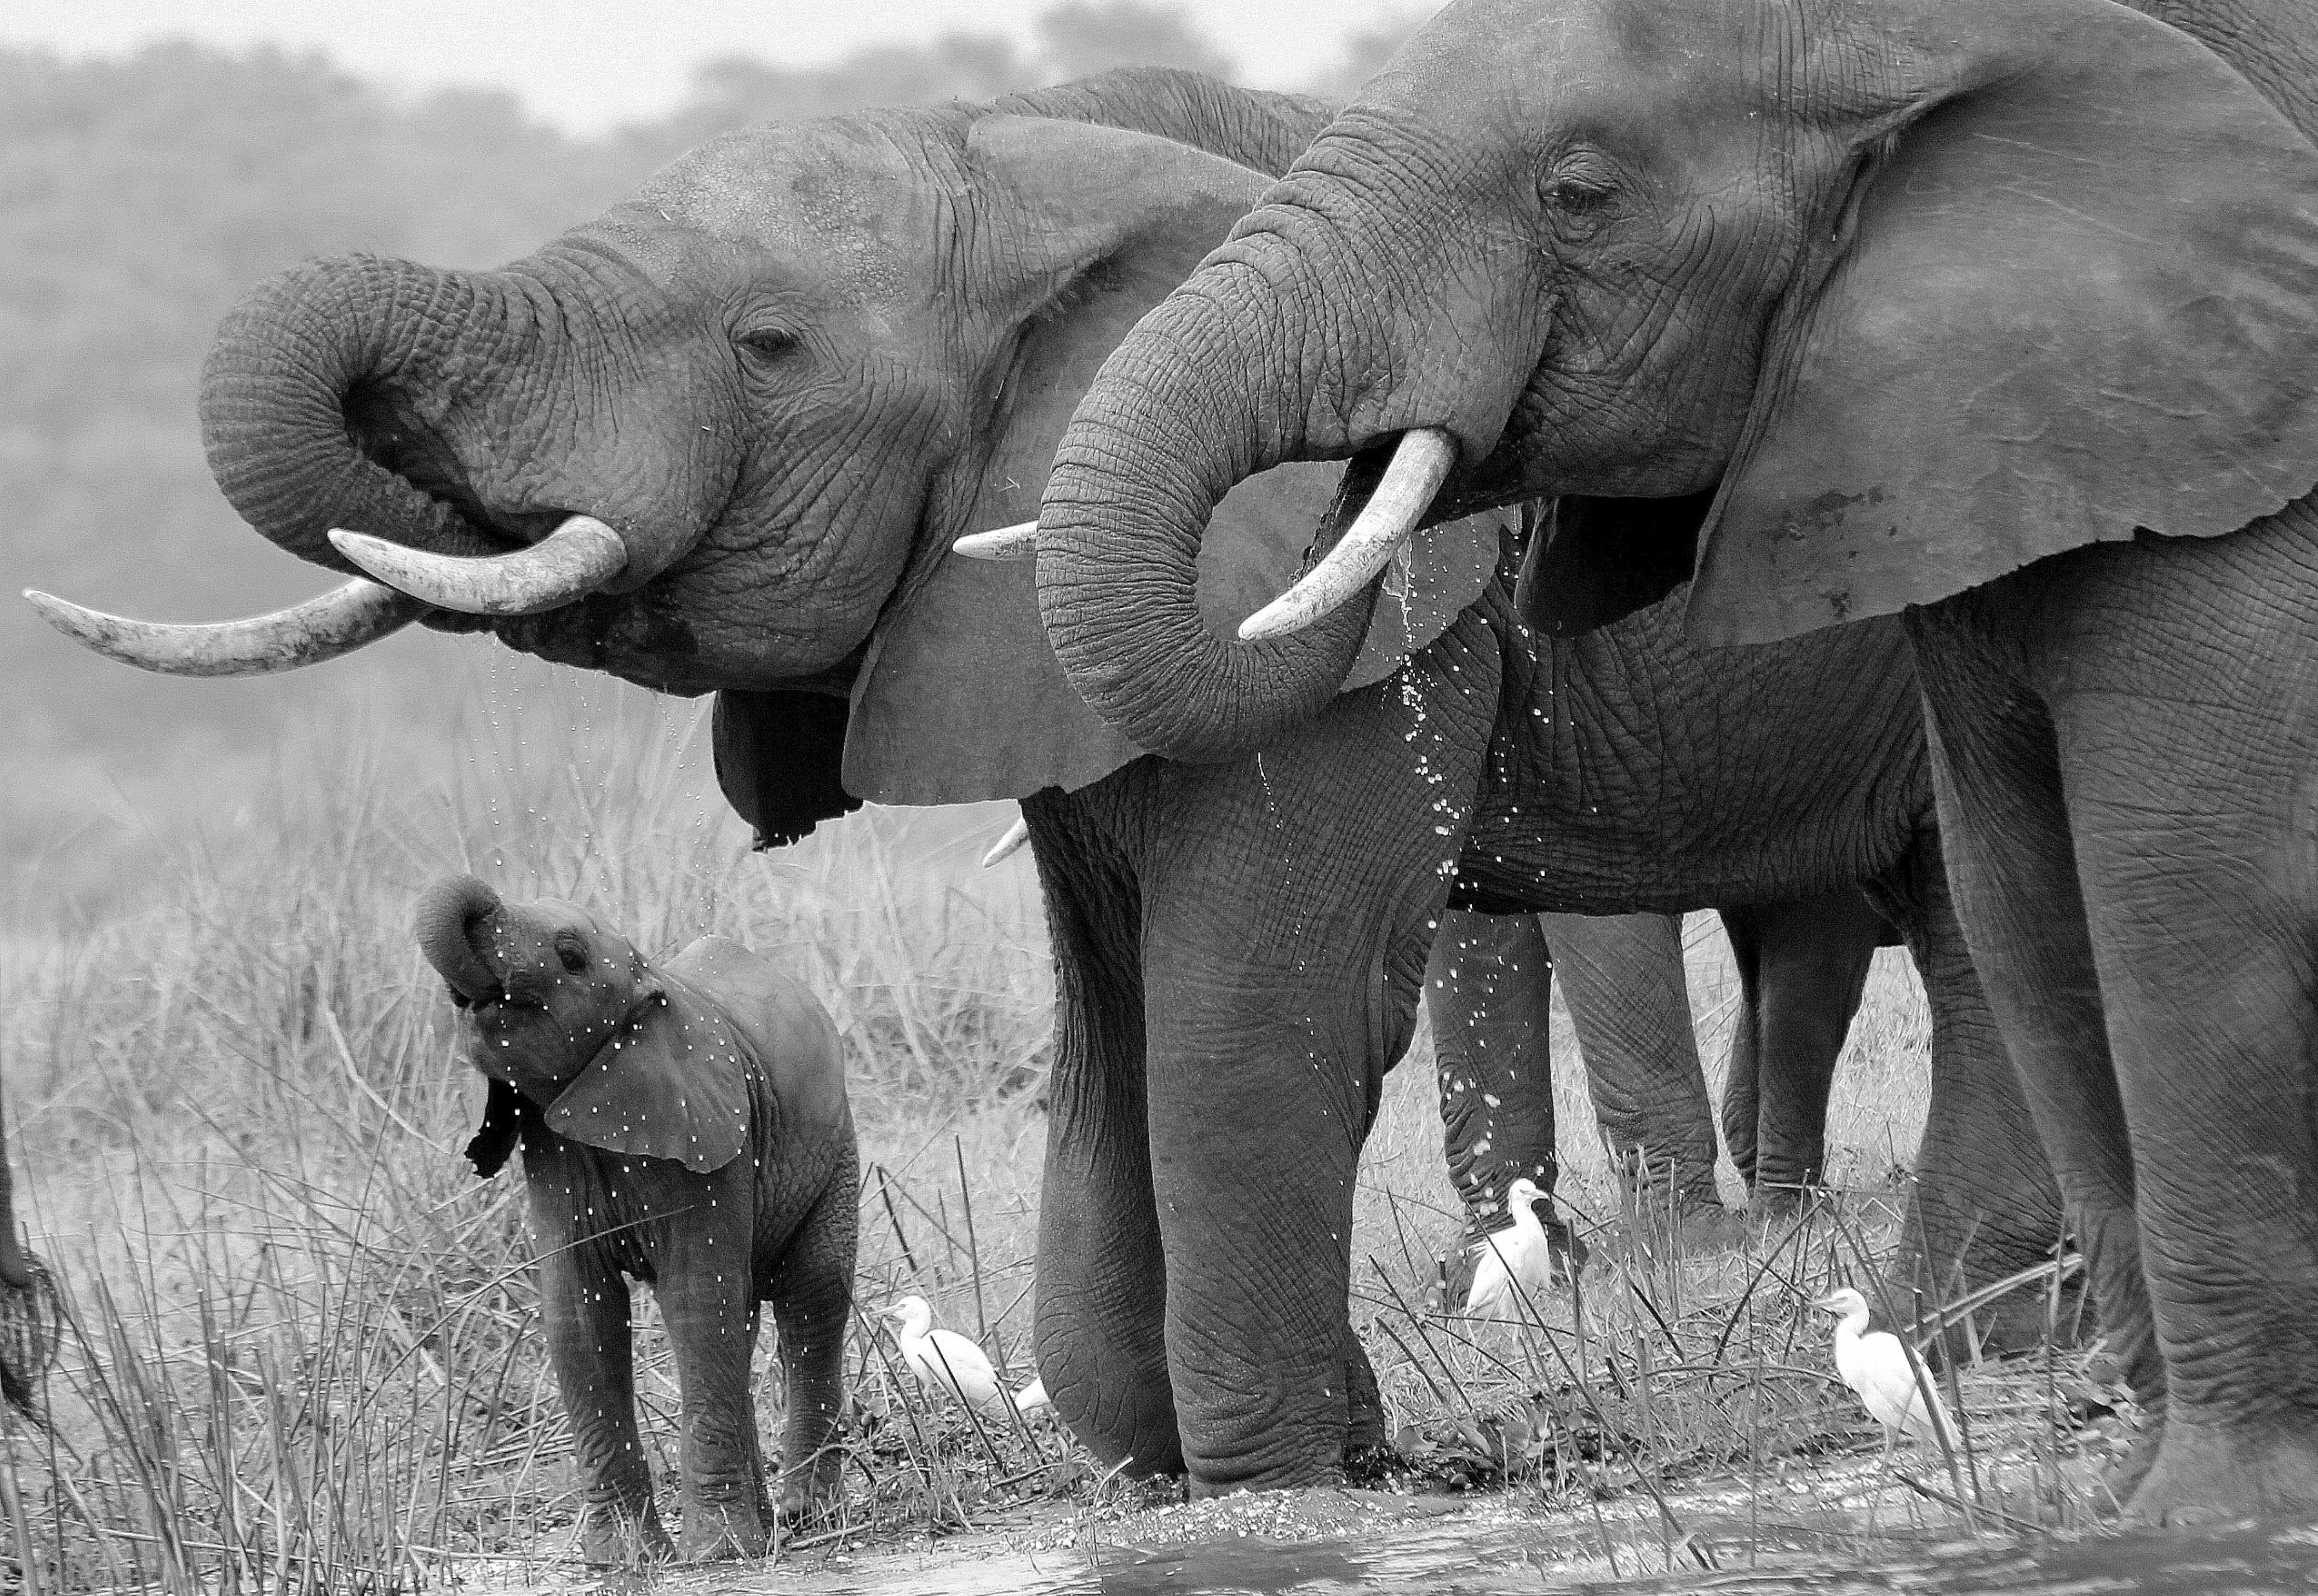 Elephants drinking, Malawi, Africa by Craig Manners